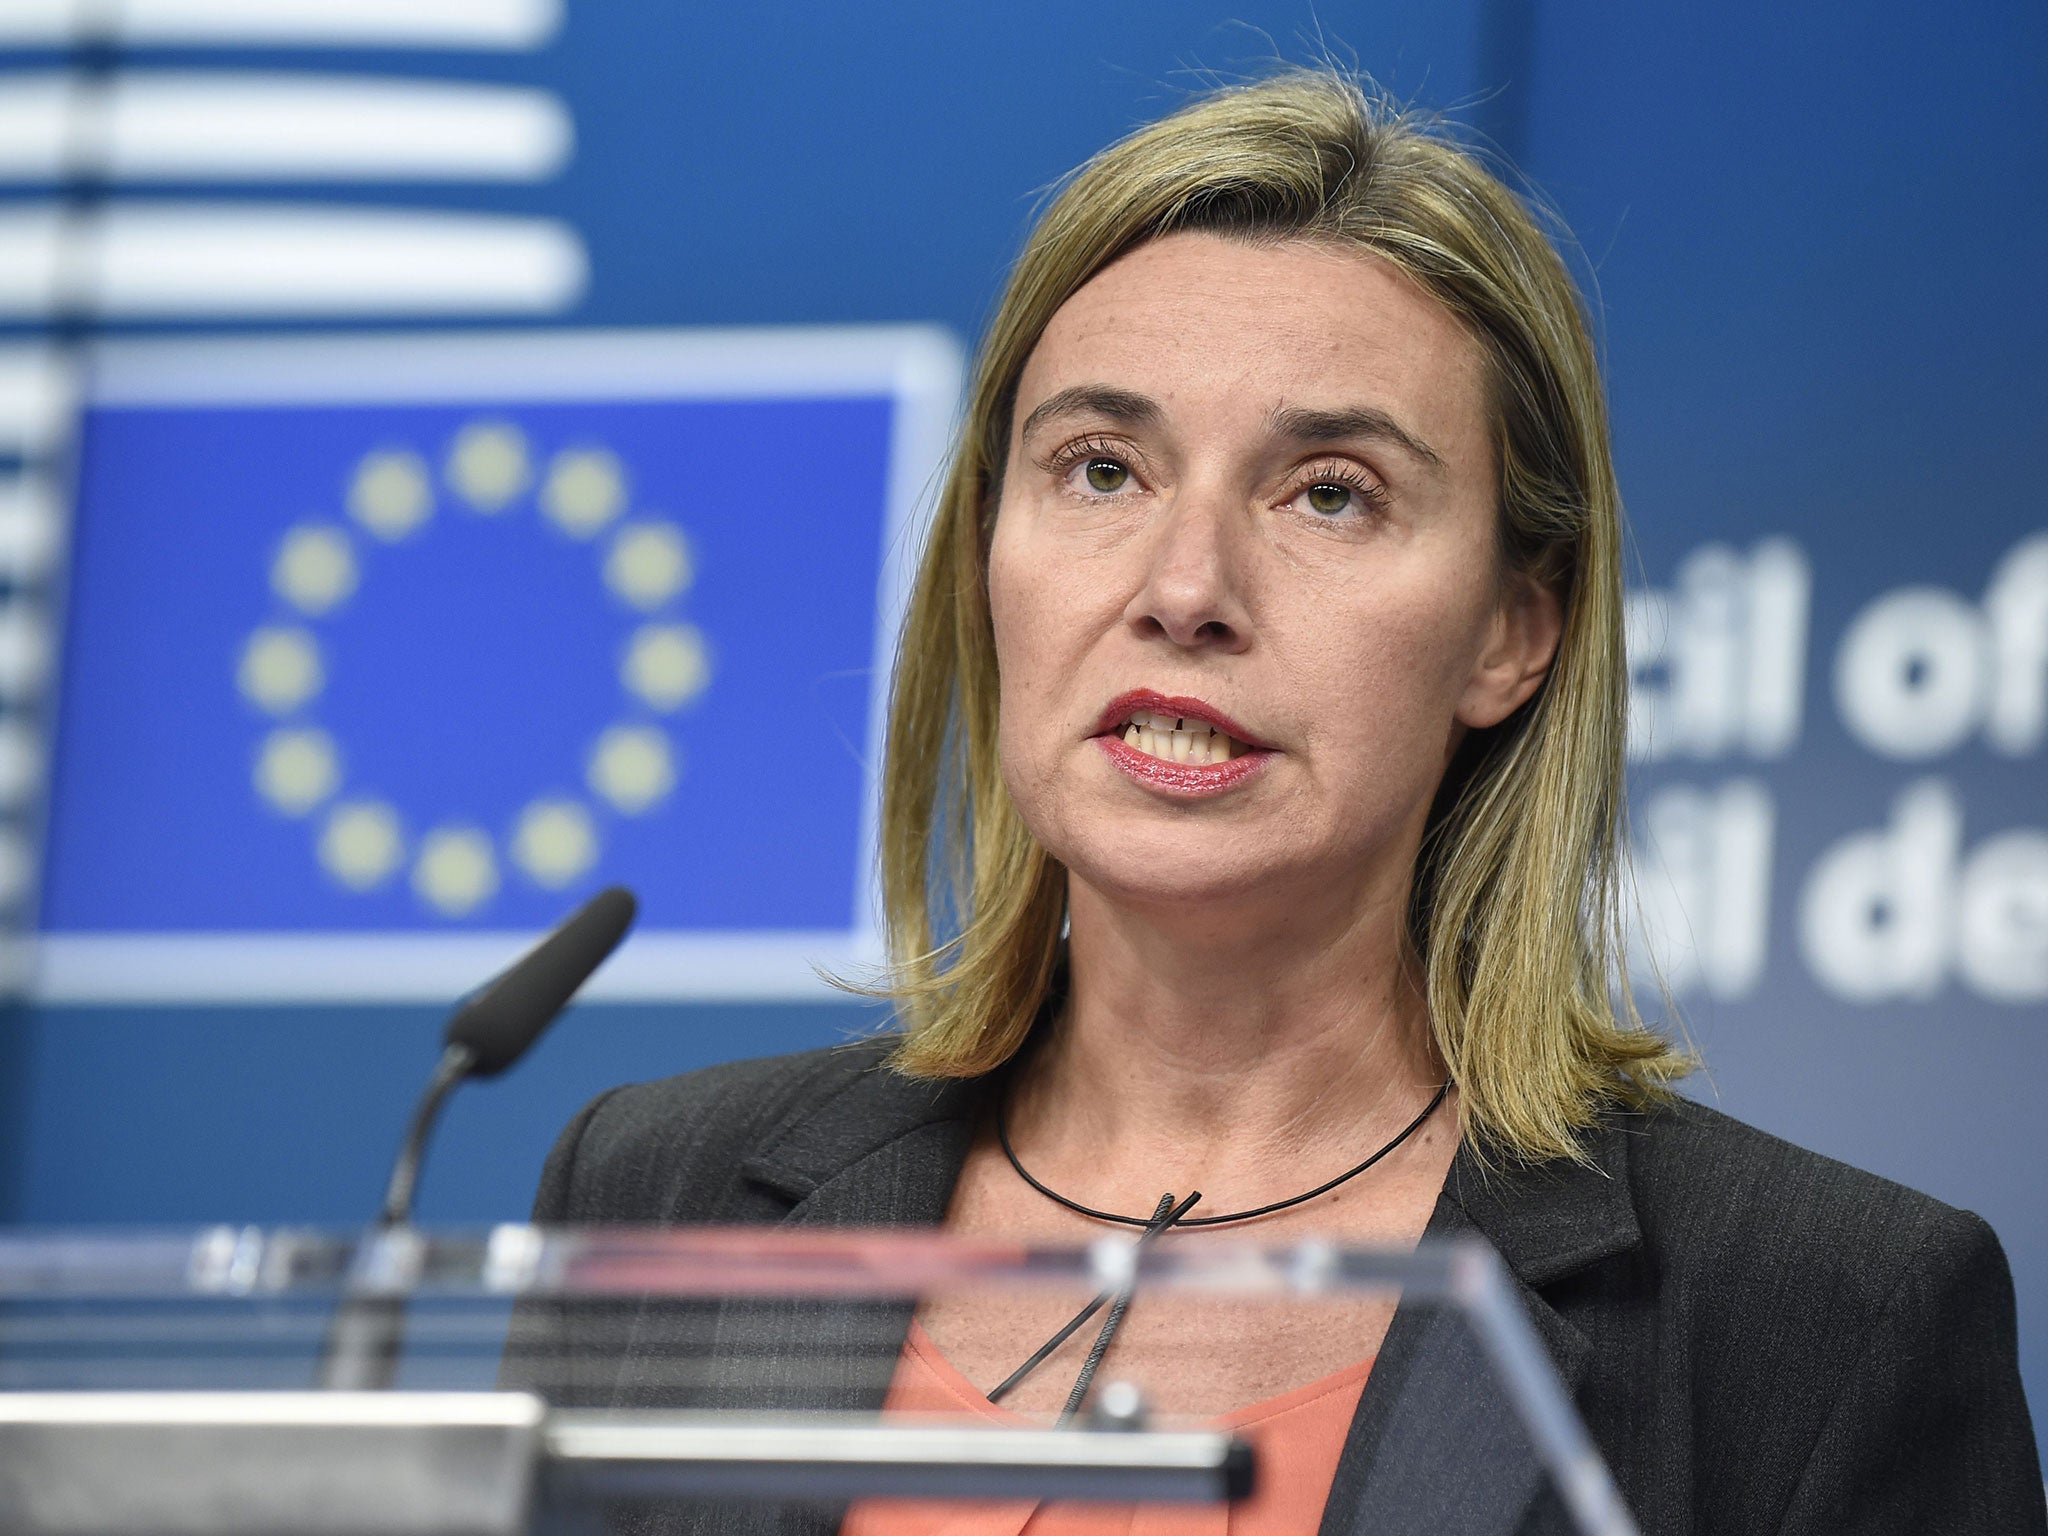 Federica Mogherini said the council of ministers would challenge some of the court's finding and consider future action to avoid similar annulments. At the same time, the EU appeal suspended the effects of the EU court ruling over 17 December until a fina